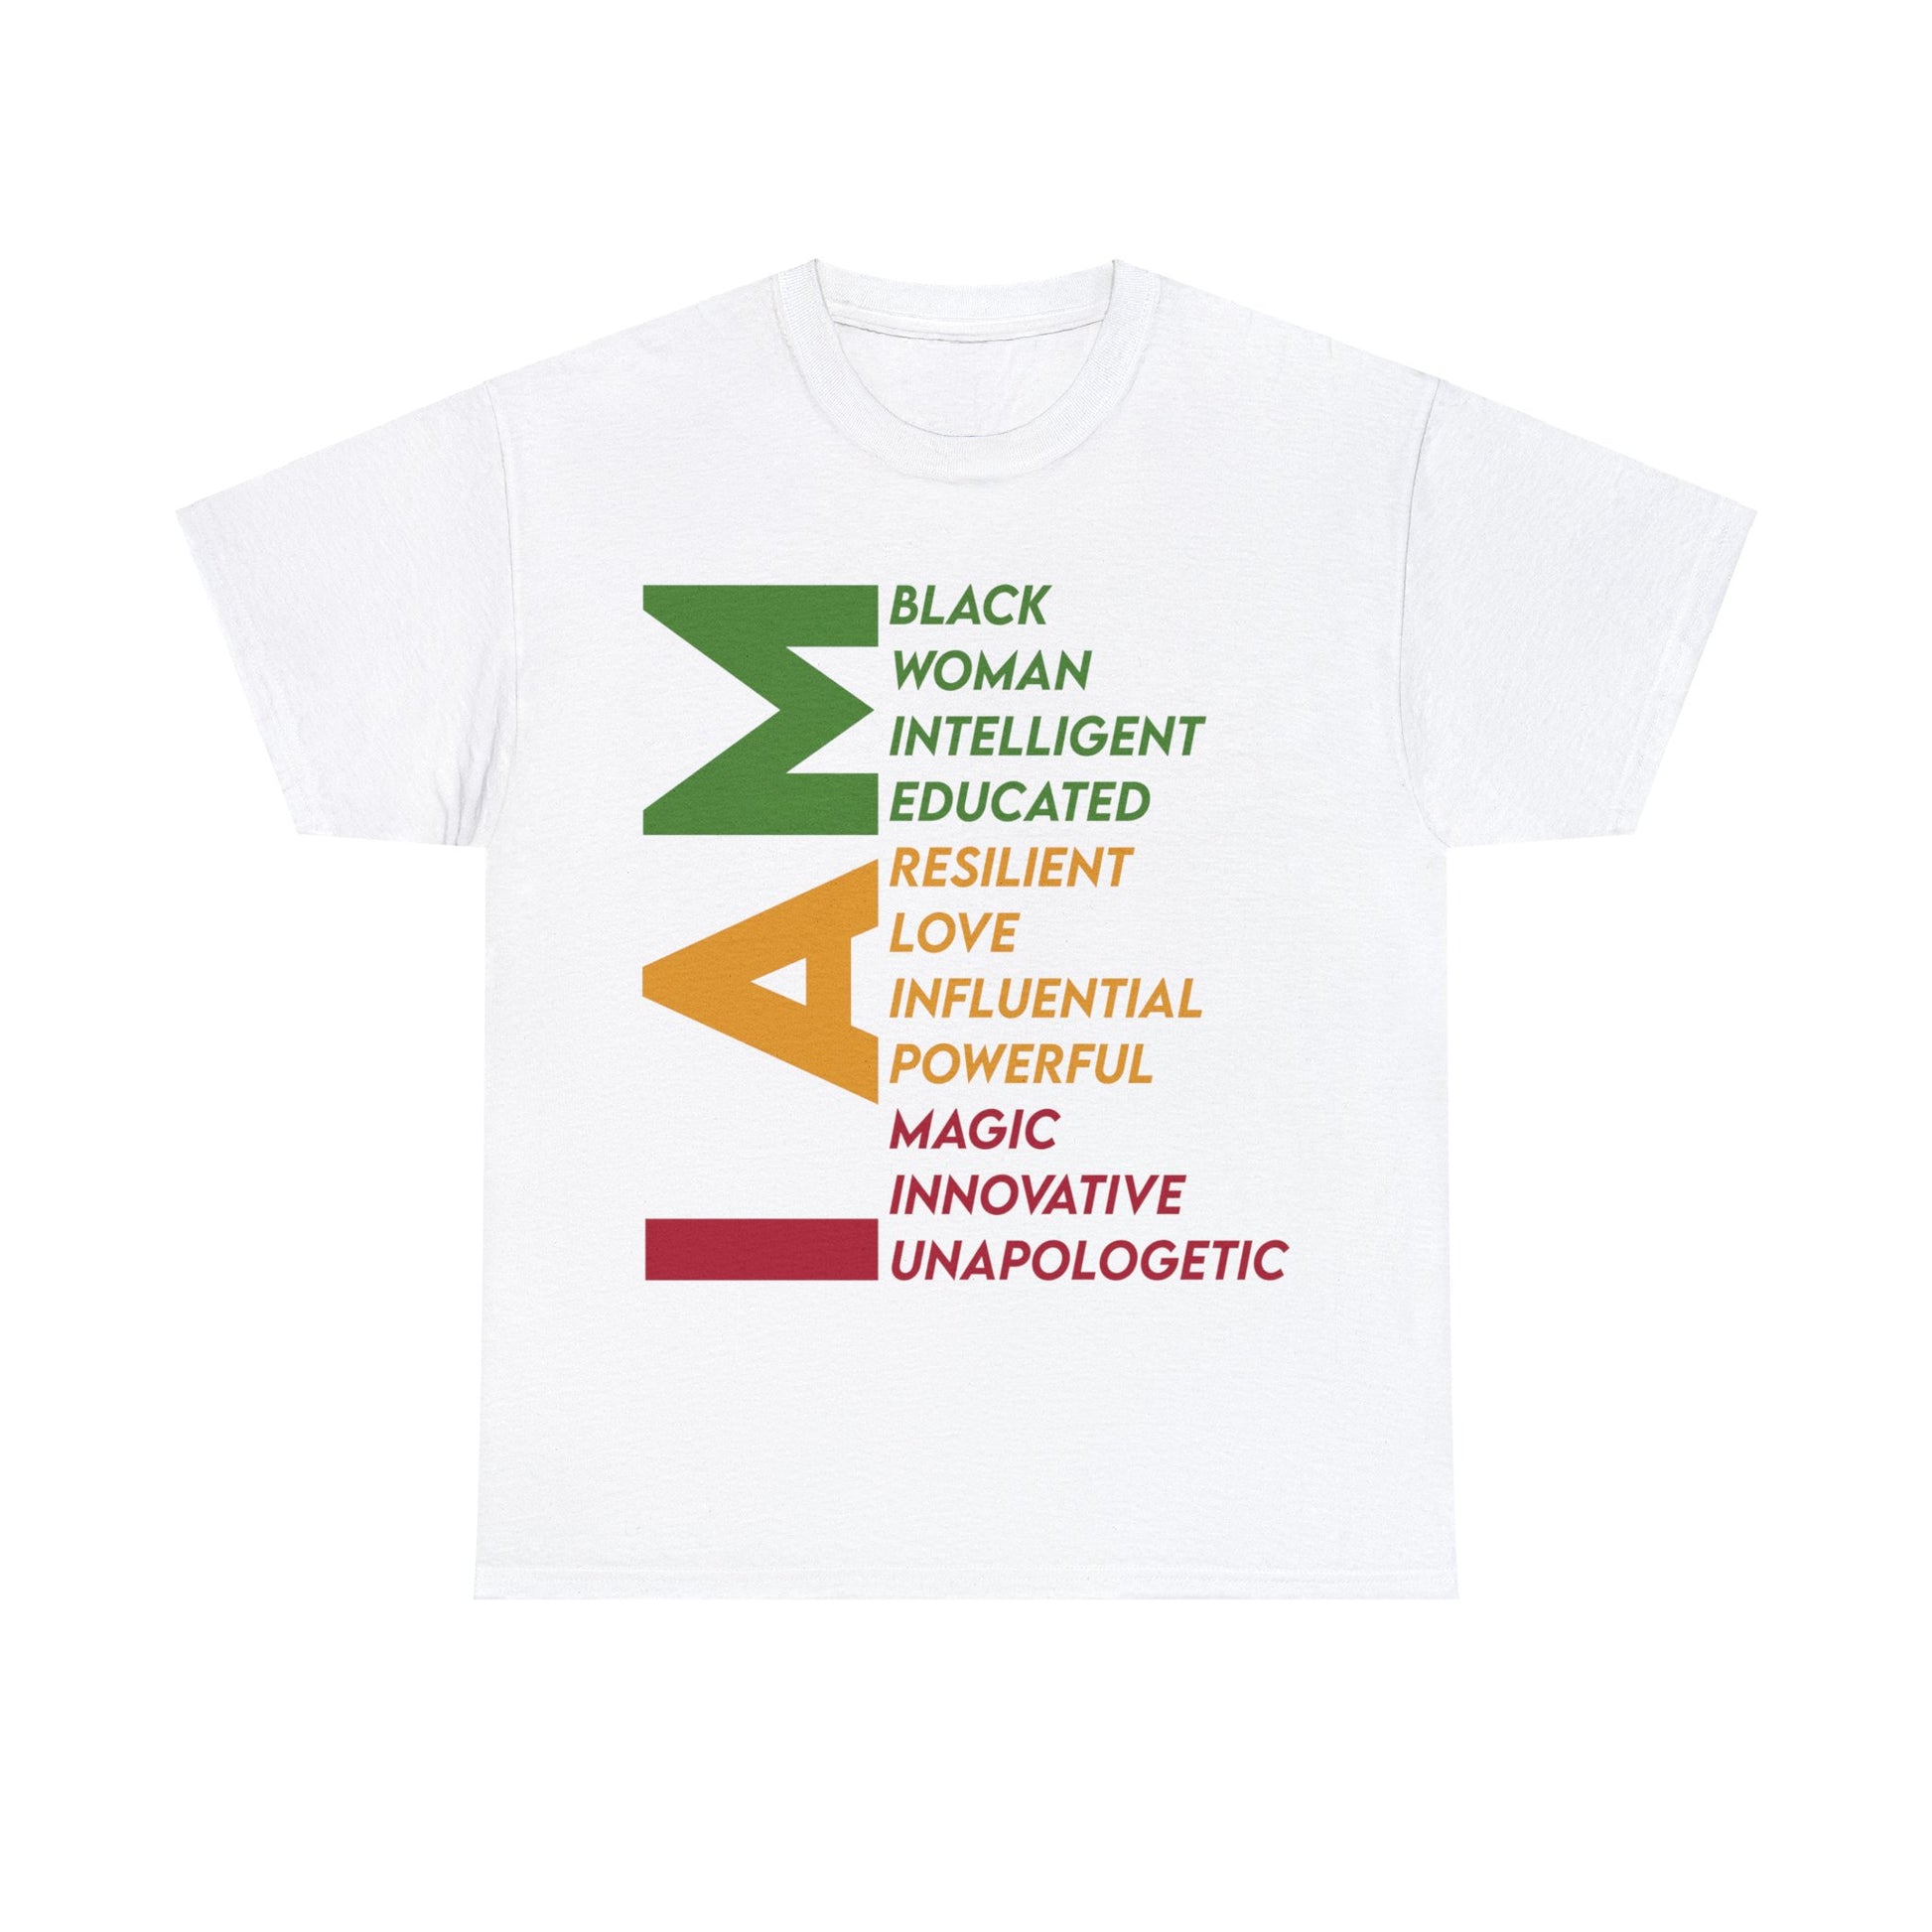 White Unisex Heavy Cotton Tee saying "I AM: Black Woman, Intelligent, Educated, Resilient, Love, Influential, Powerful, Magic, Innovative and Unapologetic."